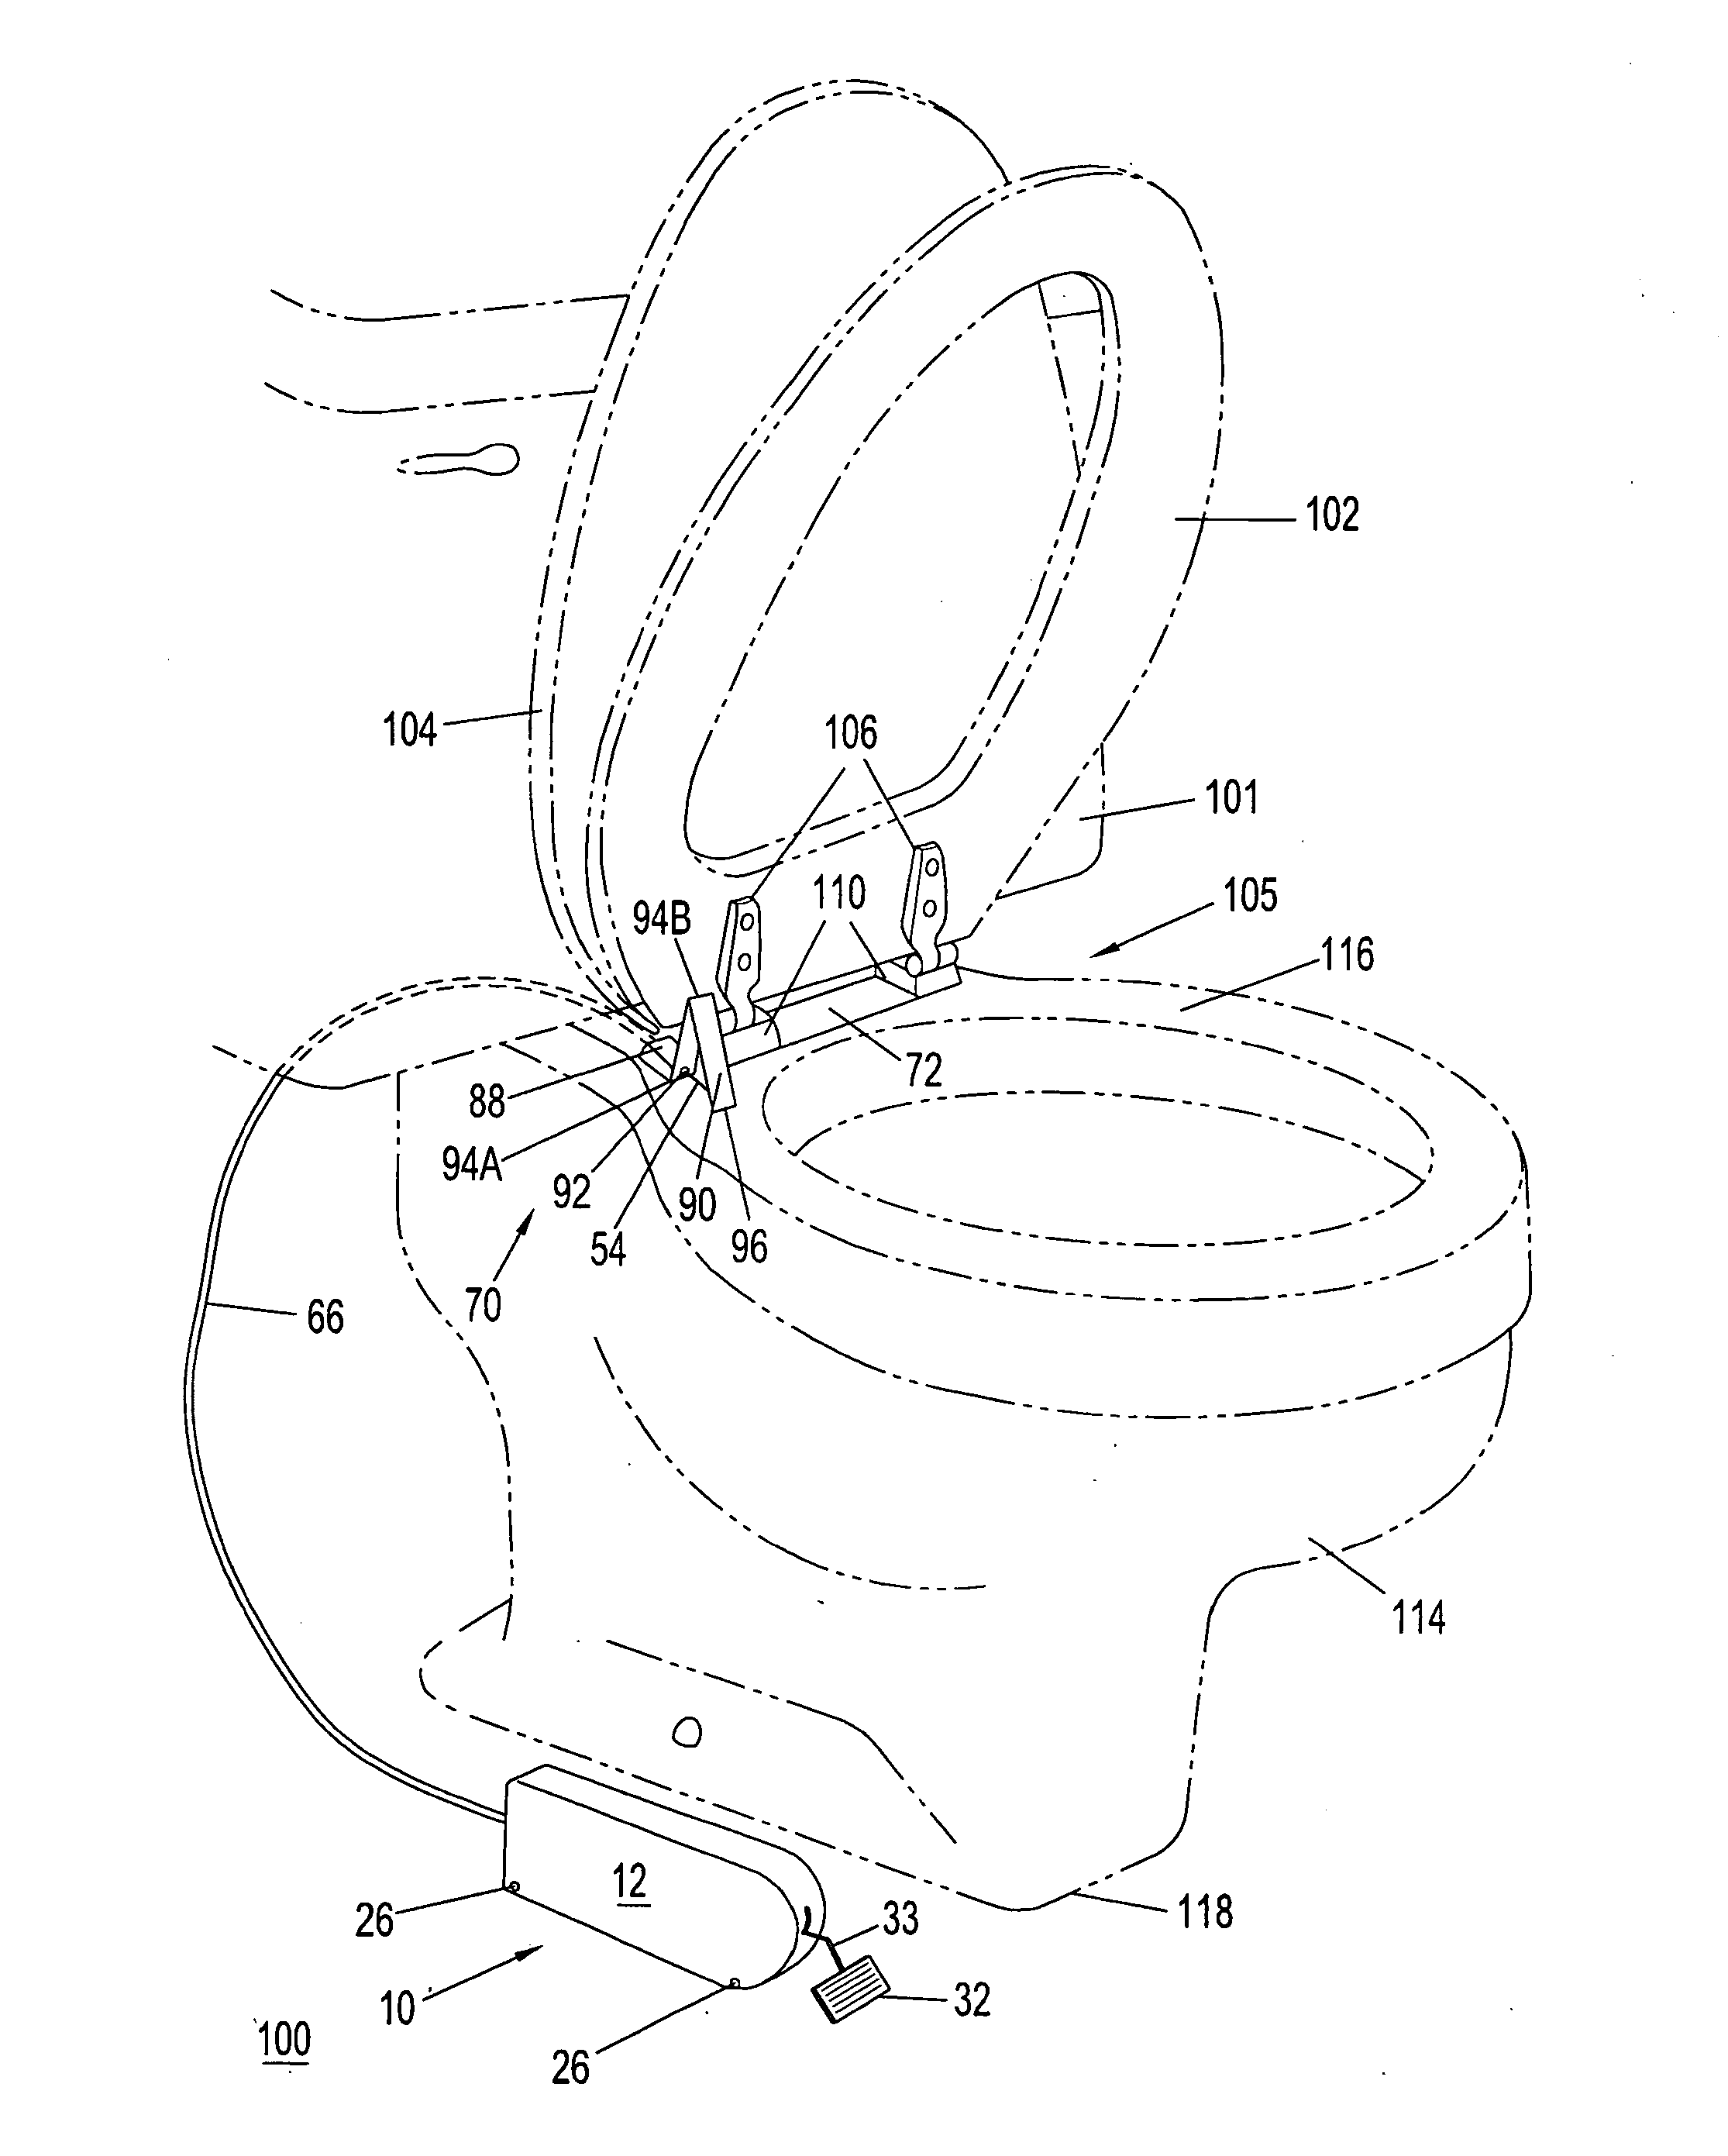 Foot actuated toilet seat lifting and self-lowering mechanism